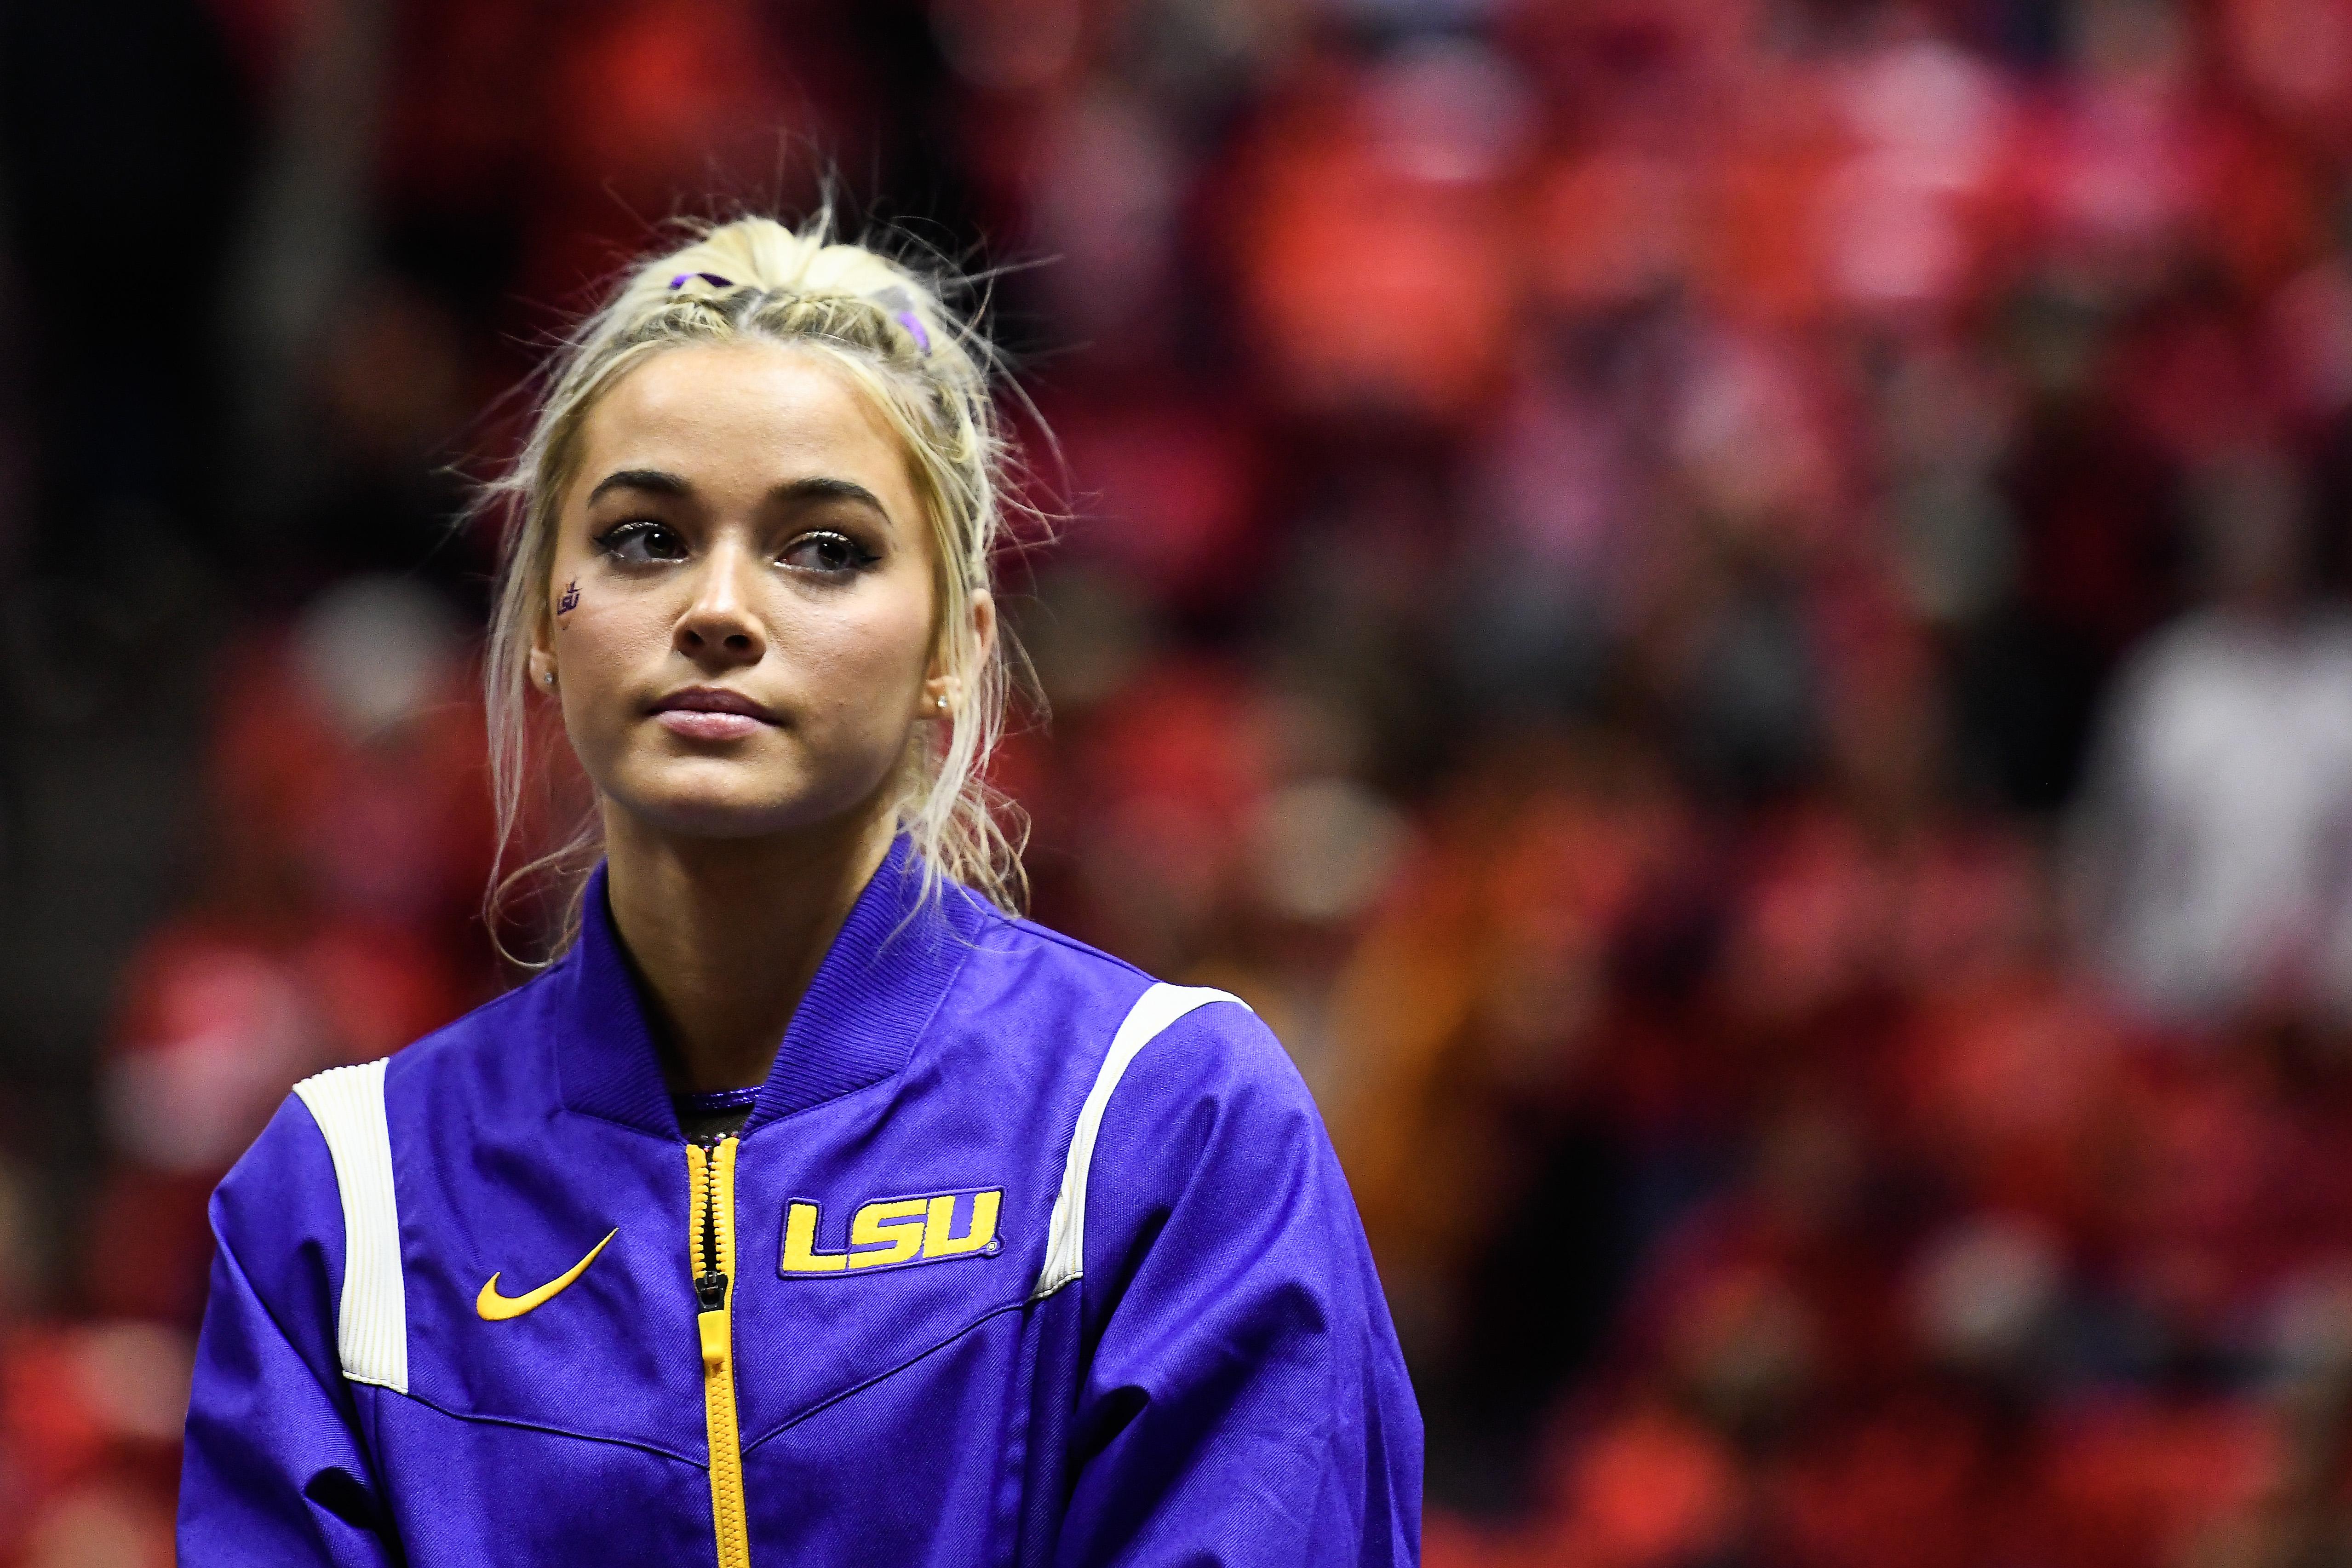 Olivia Dunne, LSU gymnastics and TikTok star, and her disconcerting teen boy fans, explained. picture